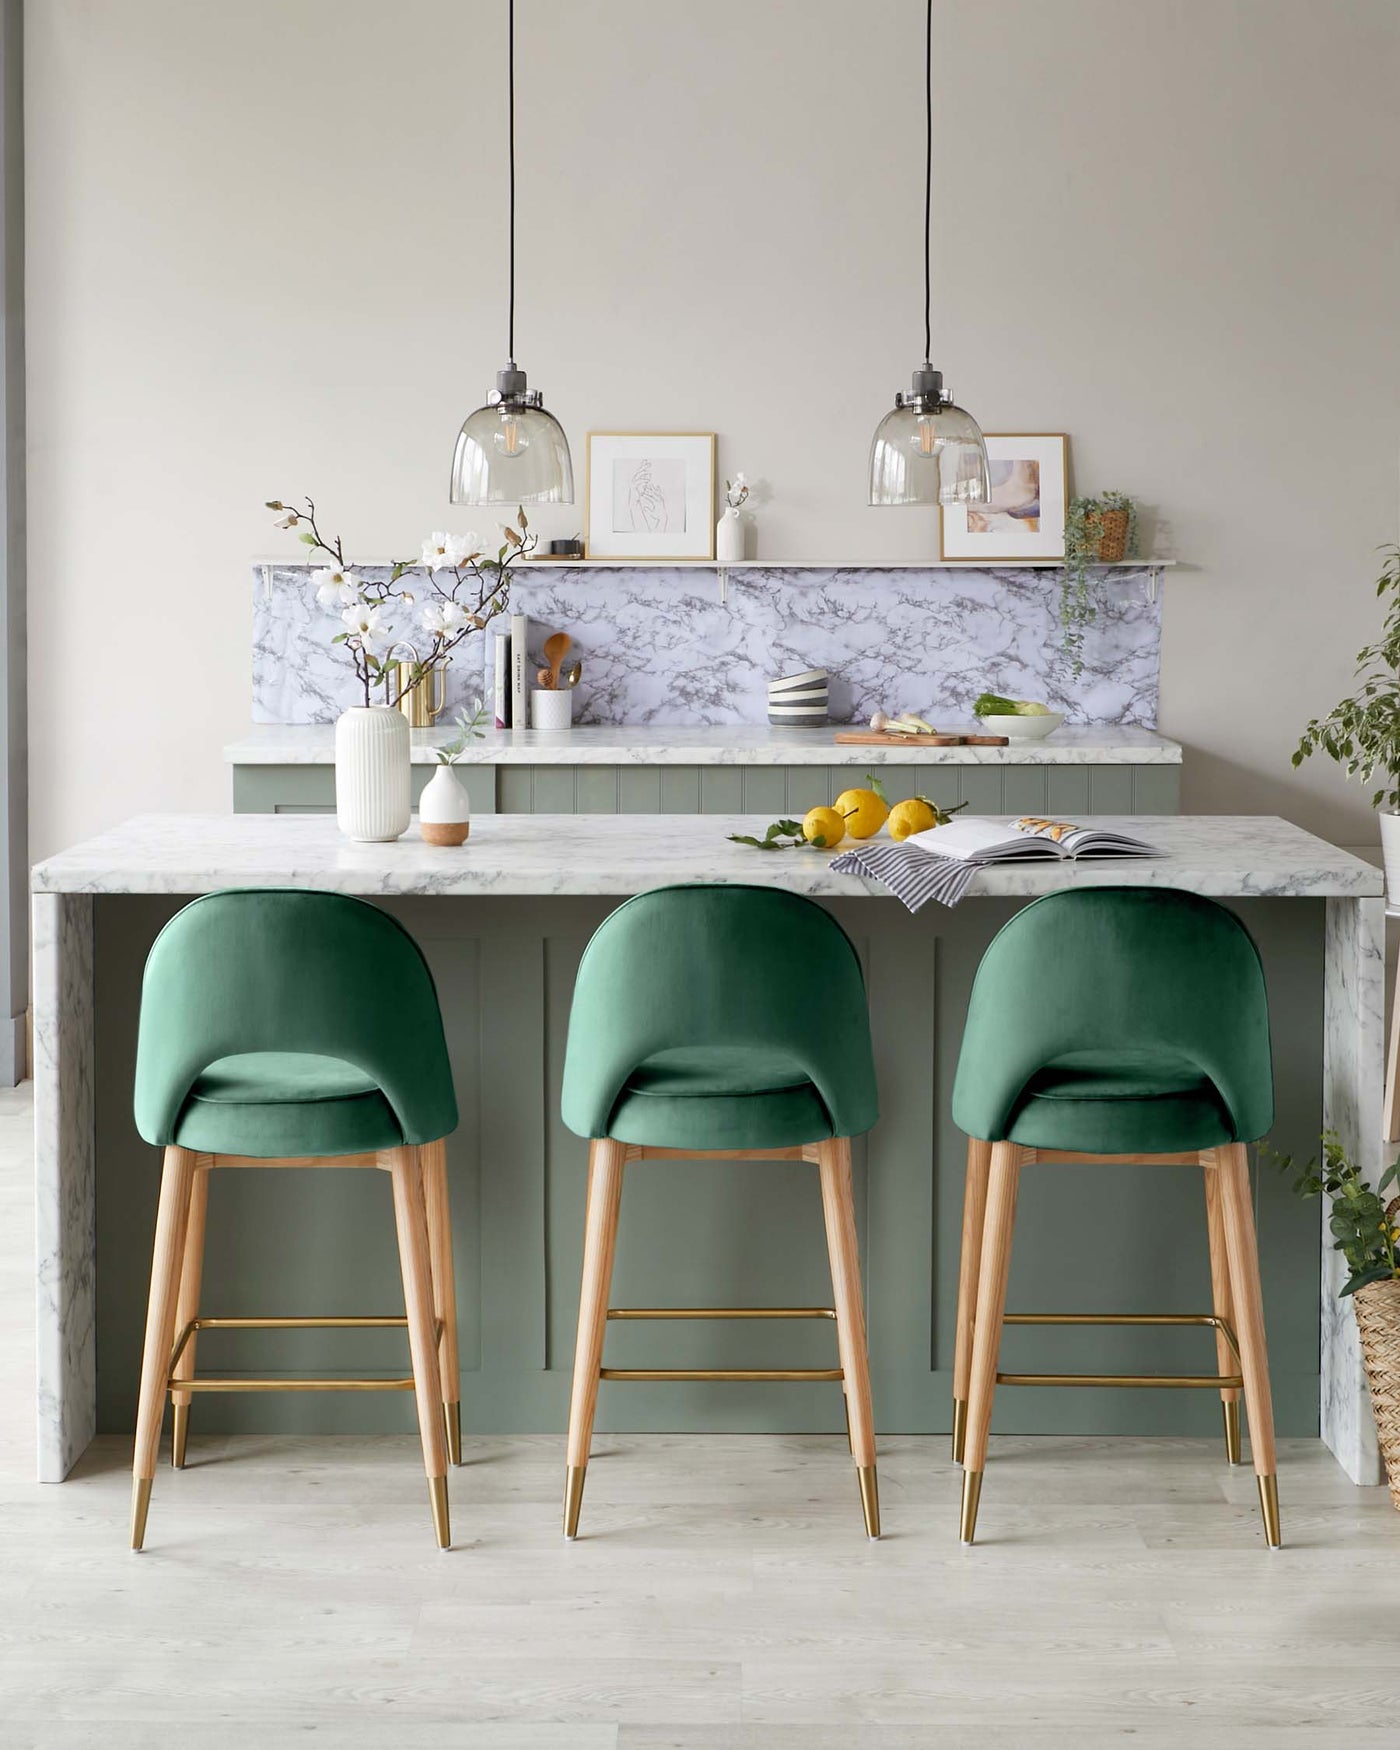 Three modern velvet-upholstered bar stools in rich green with slim wooden legs tipped with gold accents, aligned in front of a marble-topped kitchen island with cabinet storage.